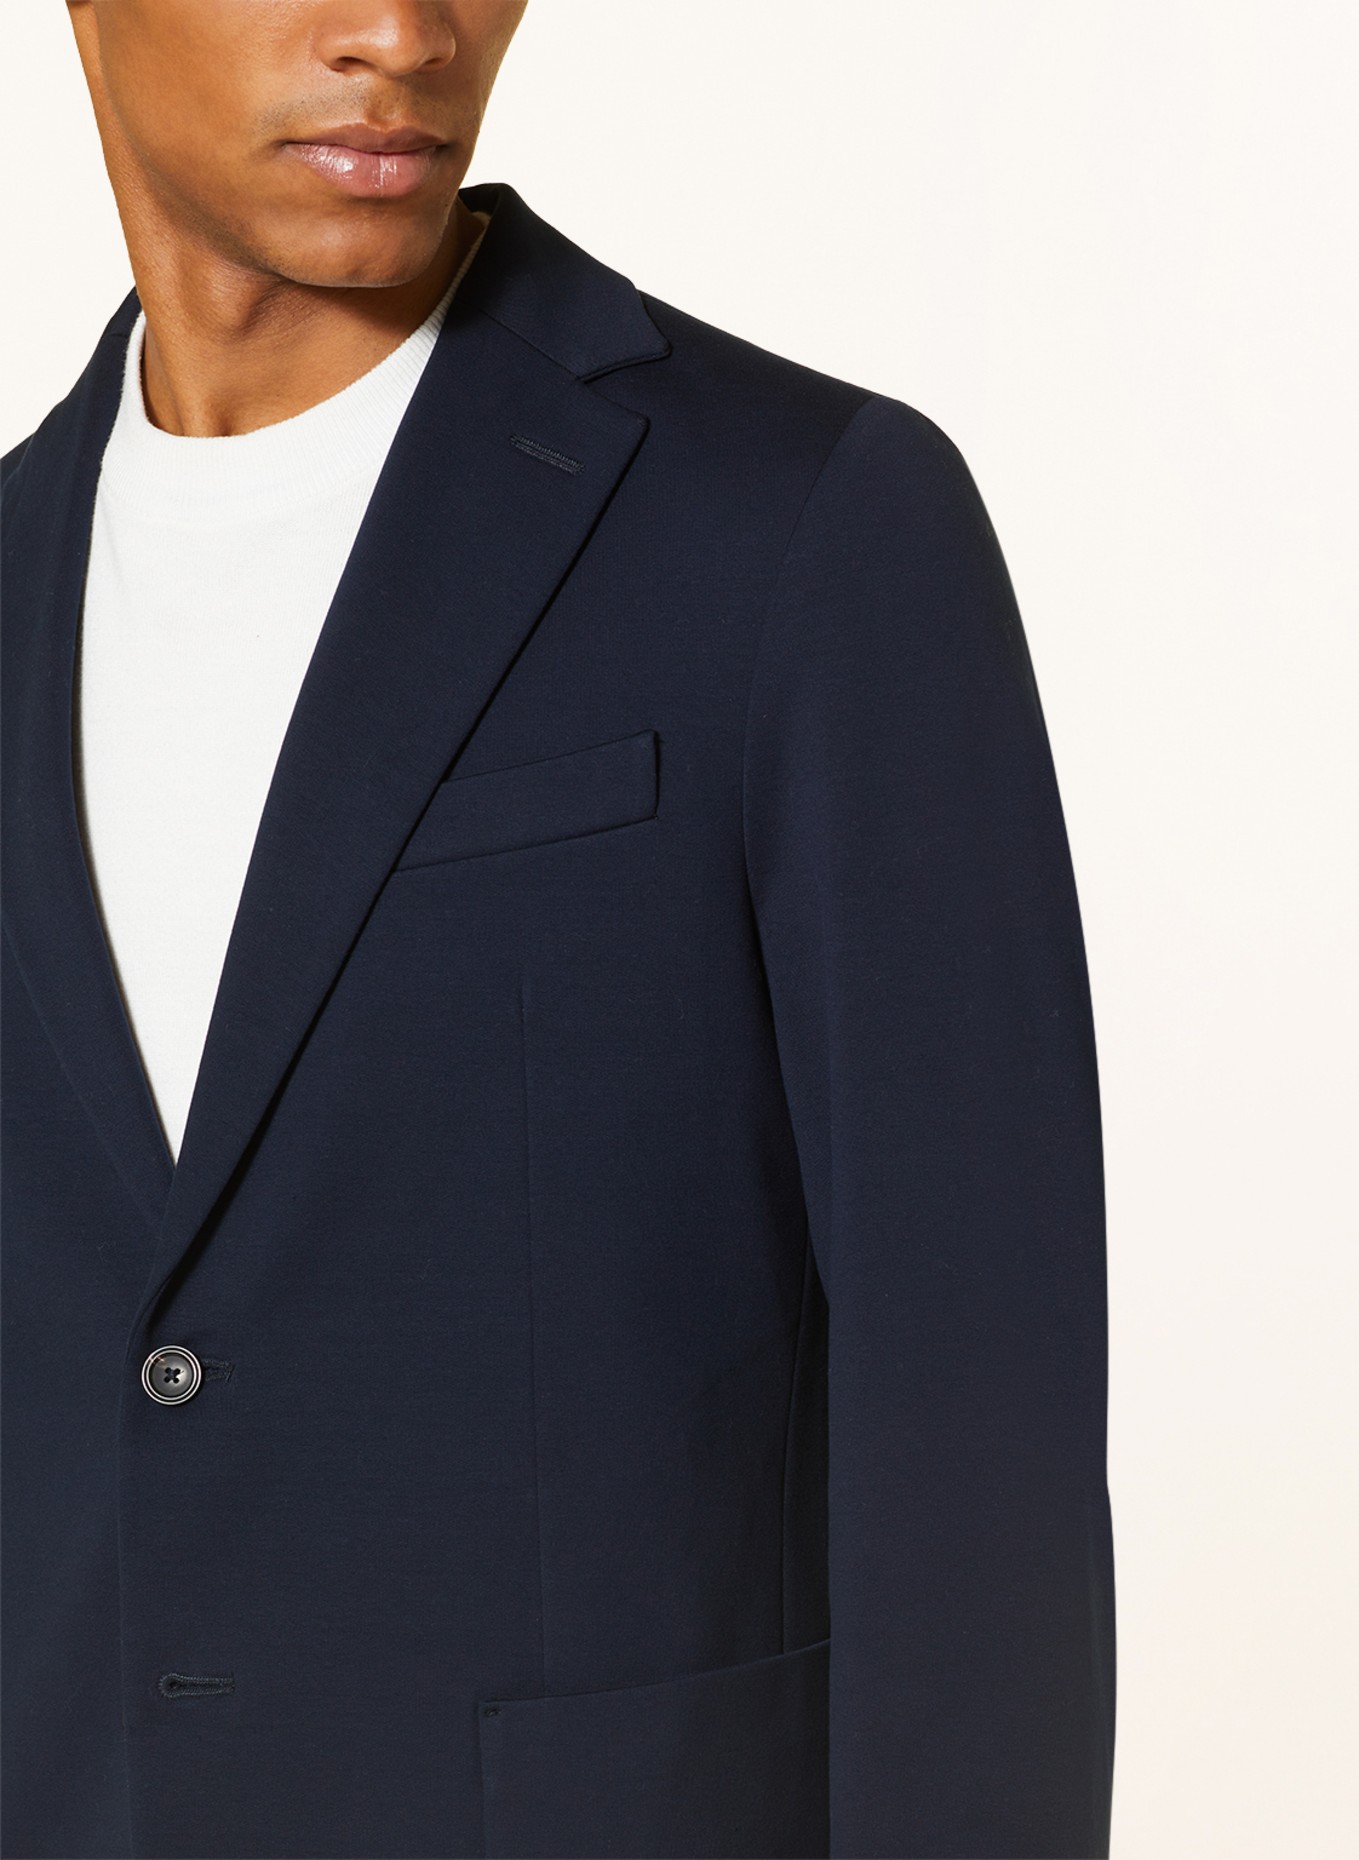 CIRCOLO 1901 Suit jacket extra slim fit made of jersey, Color: 447 Blu Navy (Image 5)